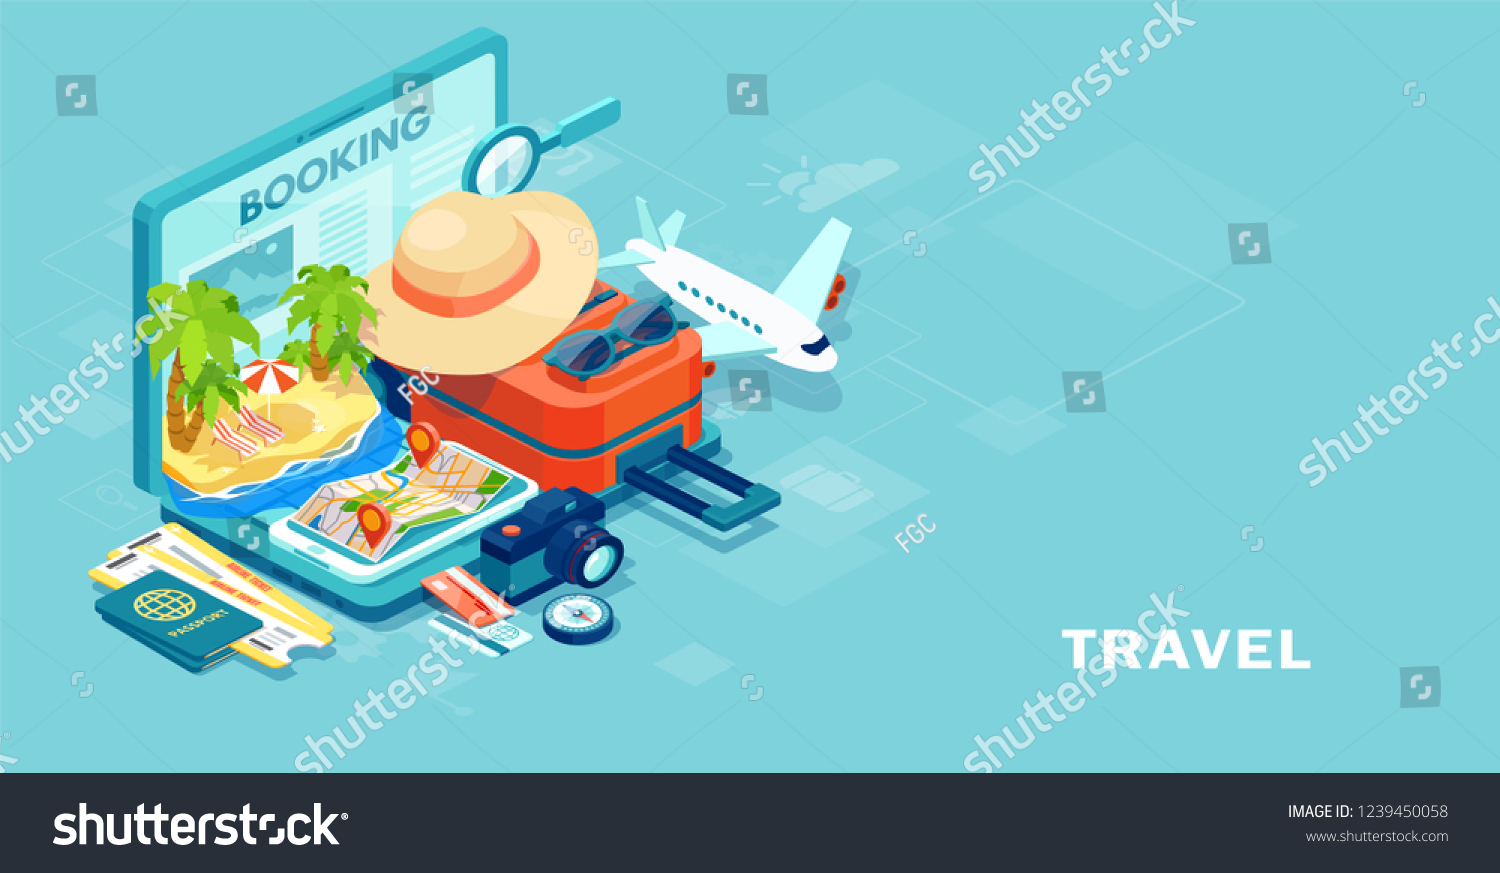 SVG of Tourism and booking app concept. Vector of travel equipment and luggage on a mobile laptop touch screen svg